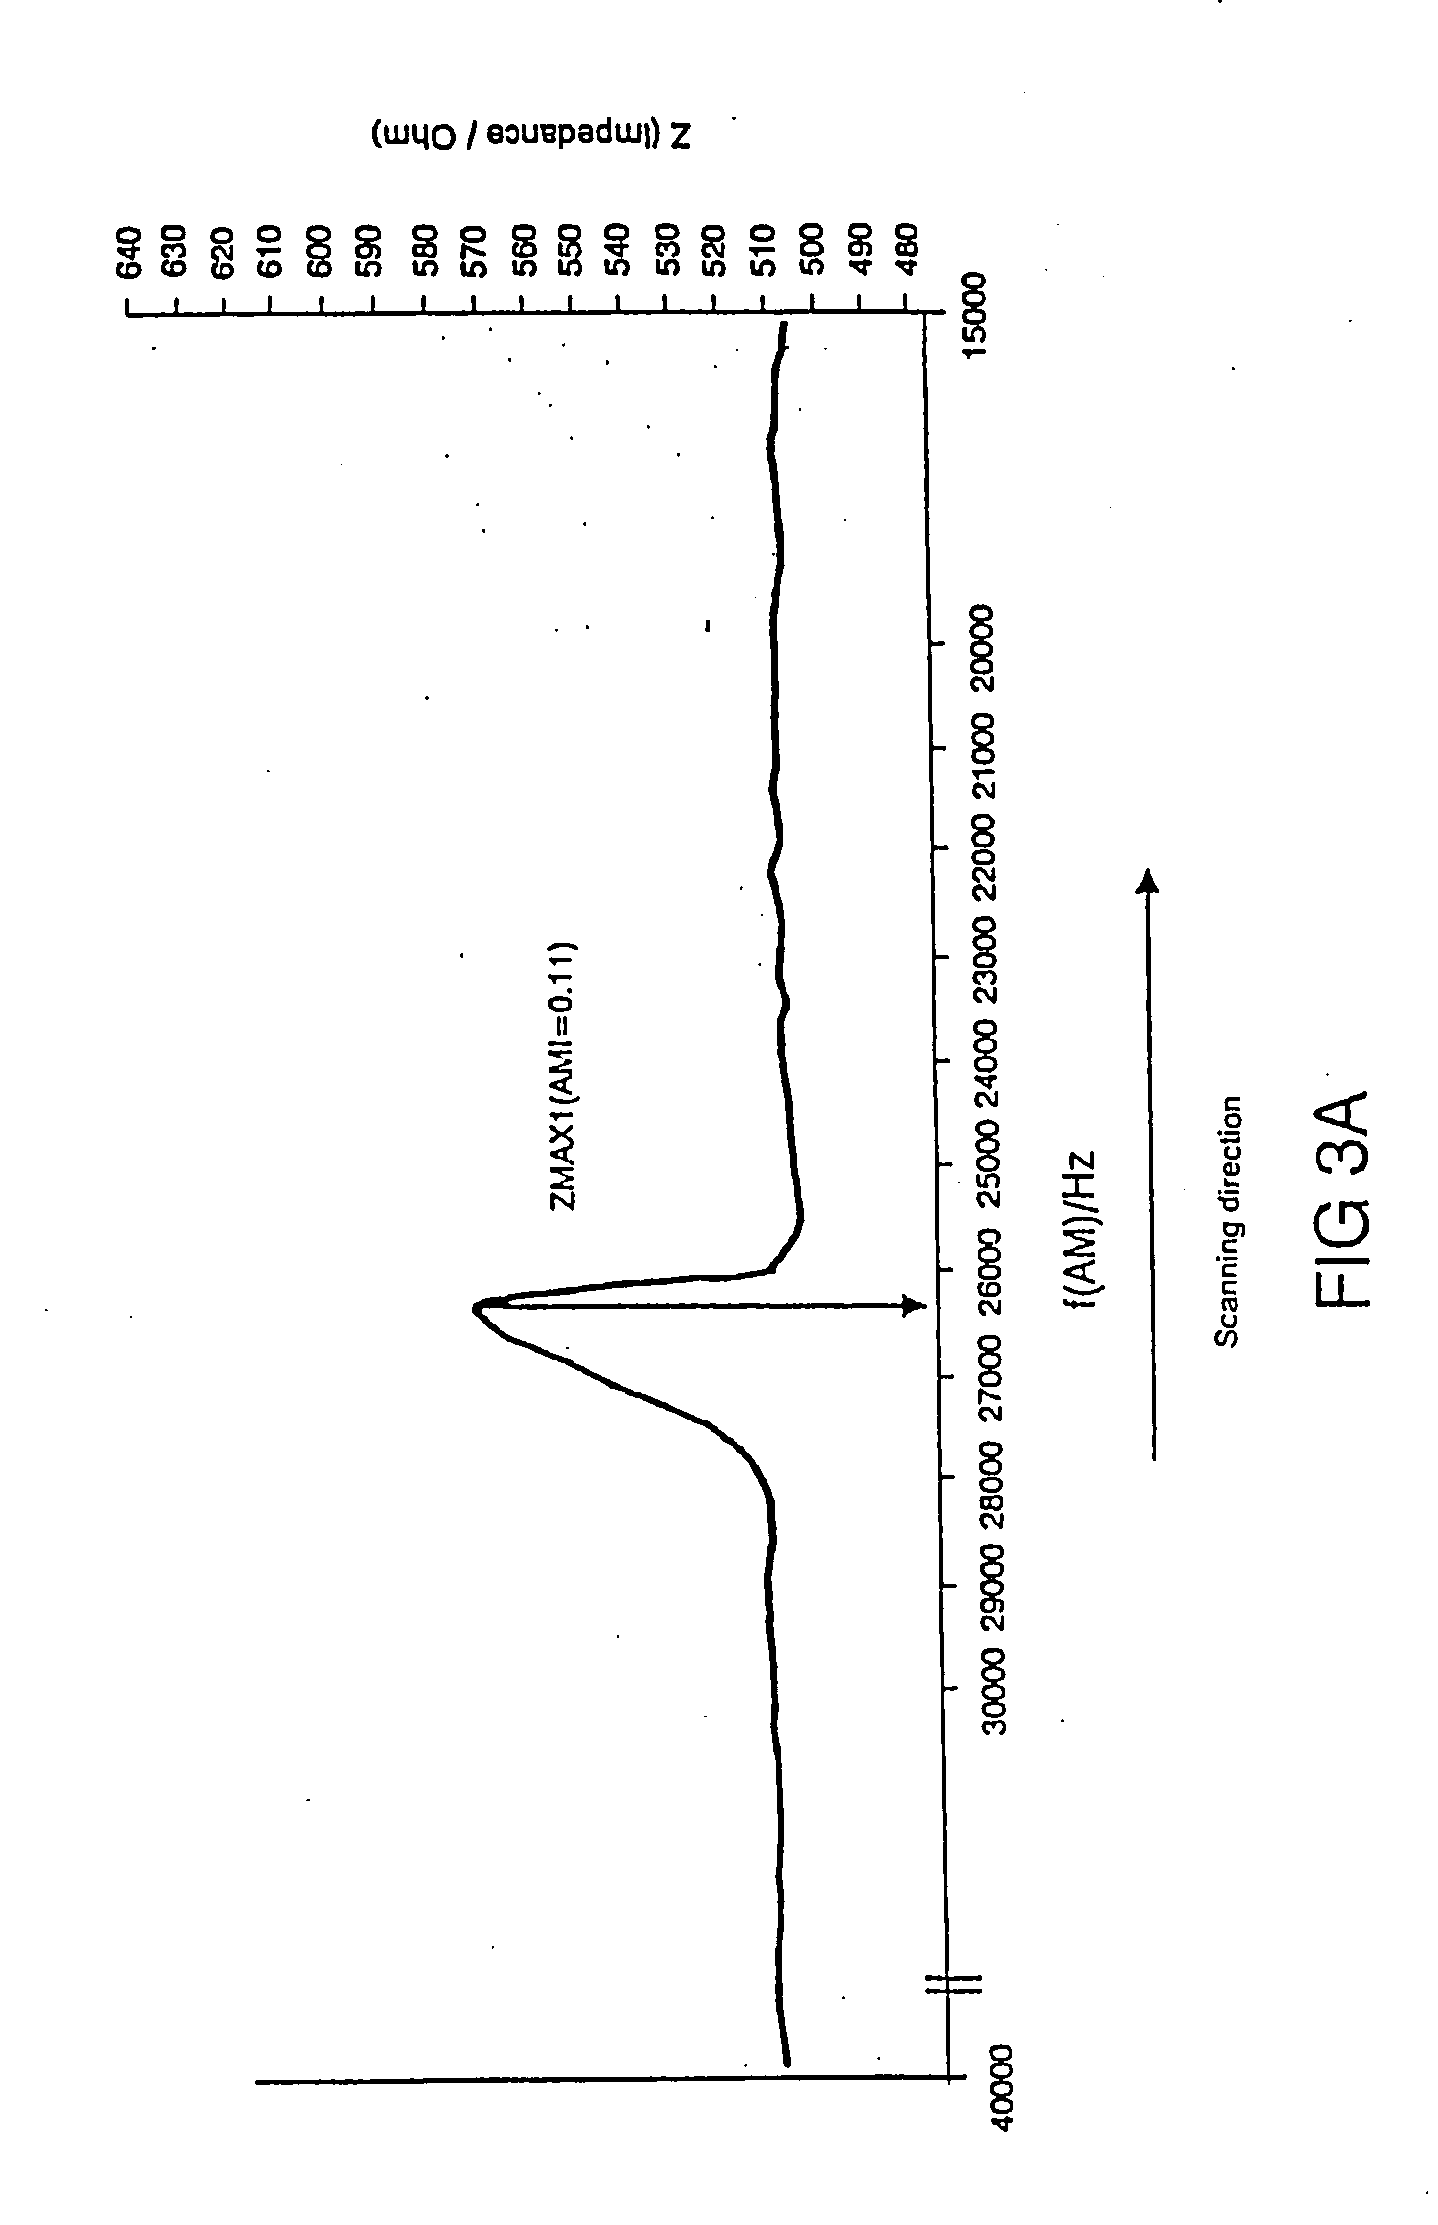 Operating method, electronic ballast and system for resonant operation of high pressure lamps in the longitudinal mode